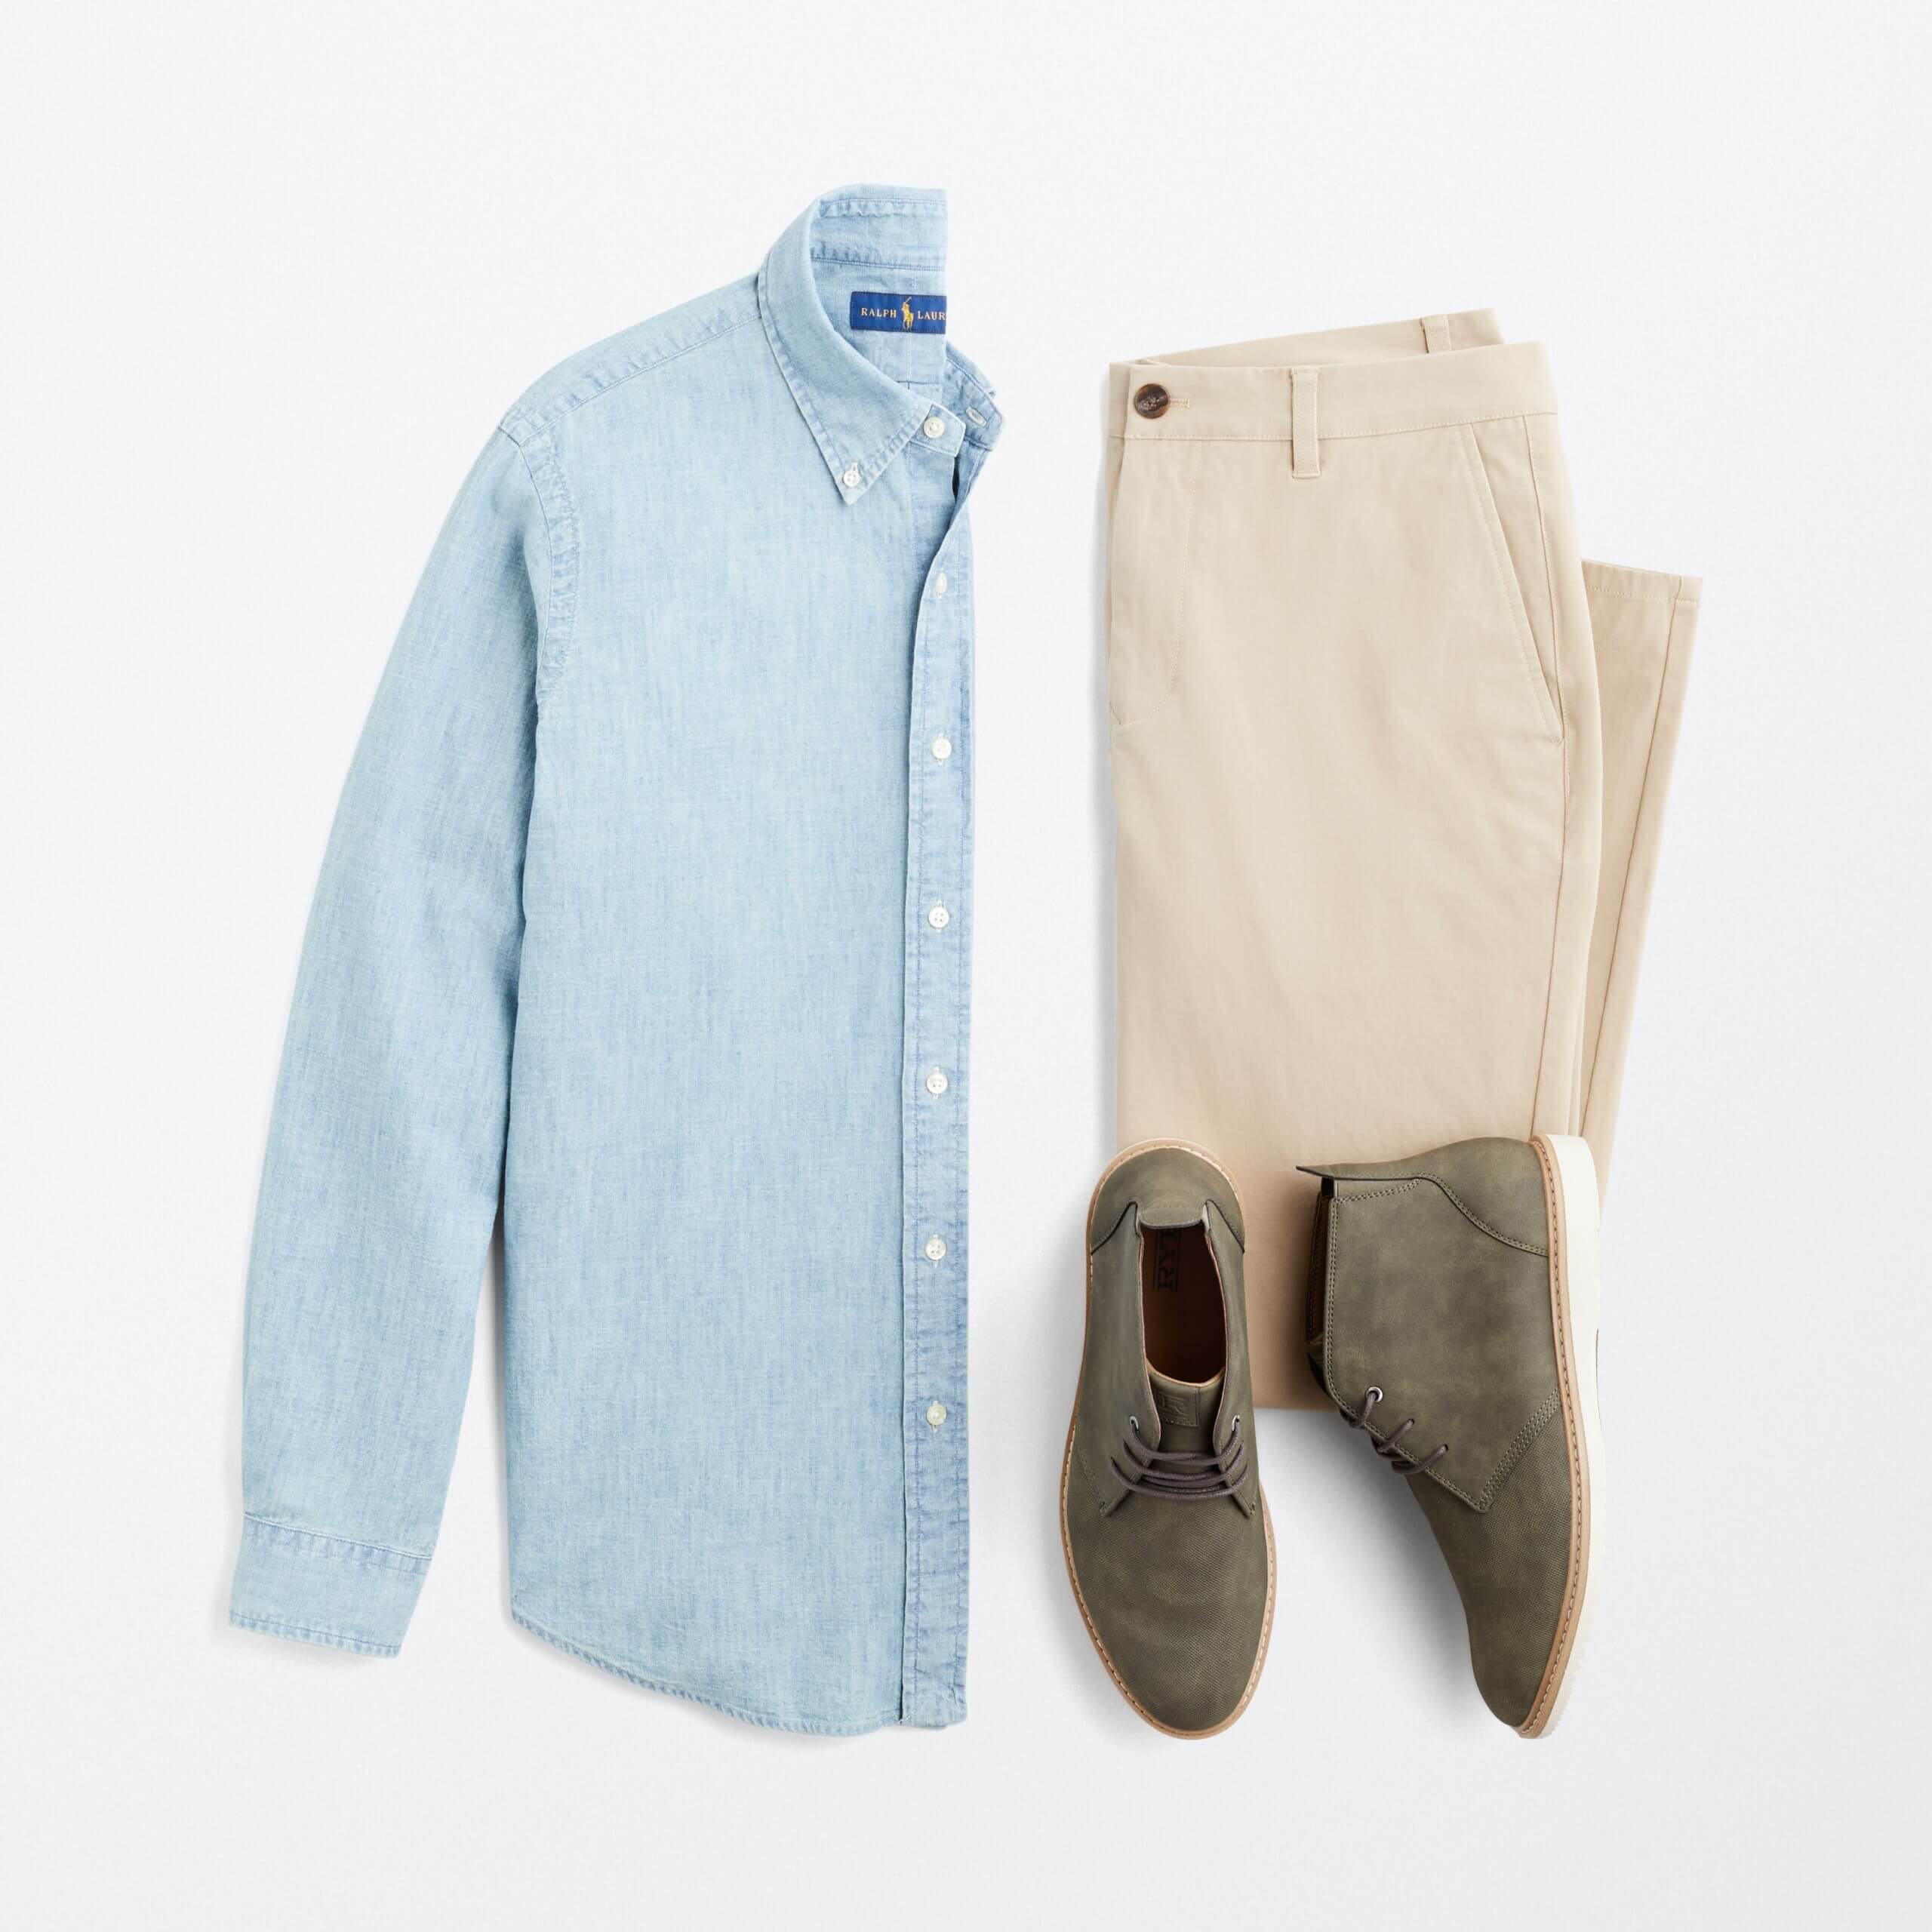 What to Wear to Graduation | Men's Style Guide | Stitch Fix